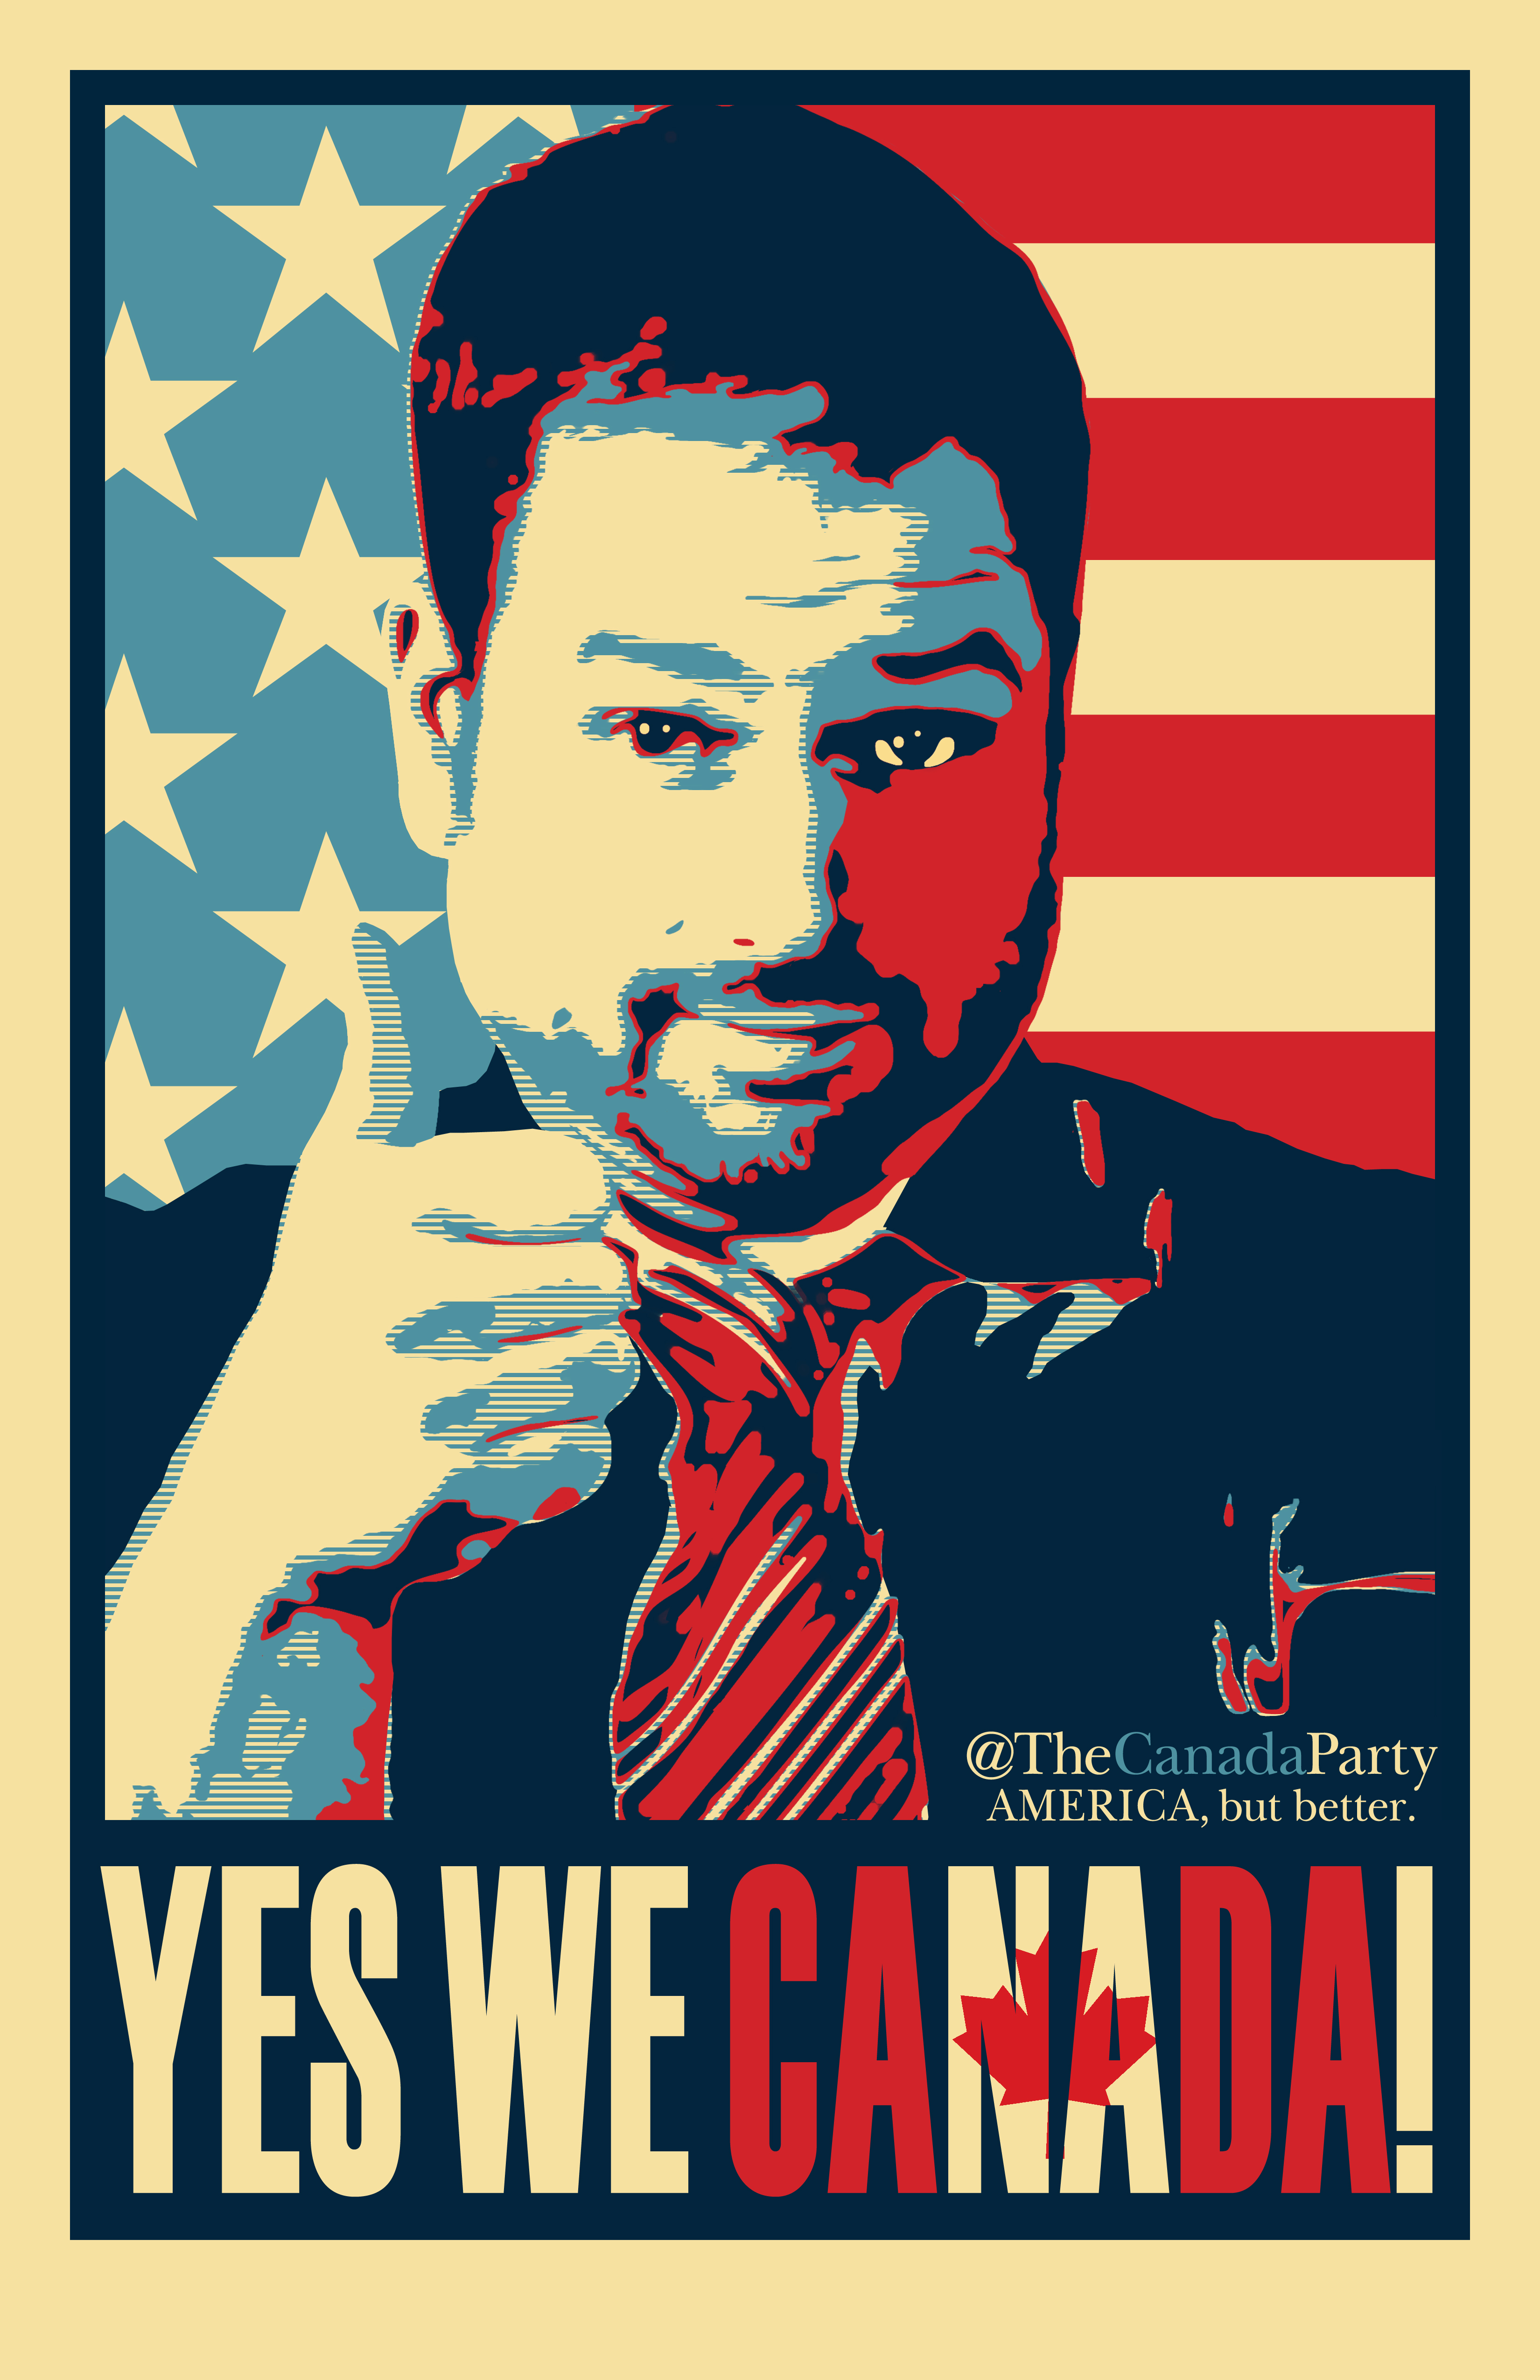 Official Canada Party campaign poster. AmericaButBetter.com 